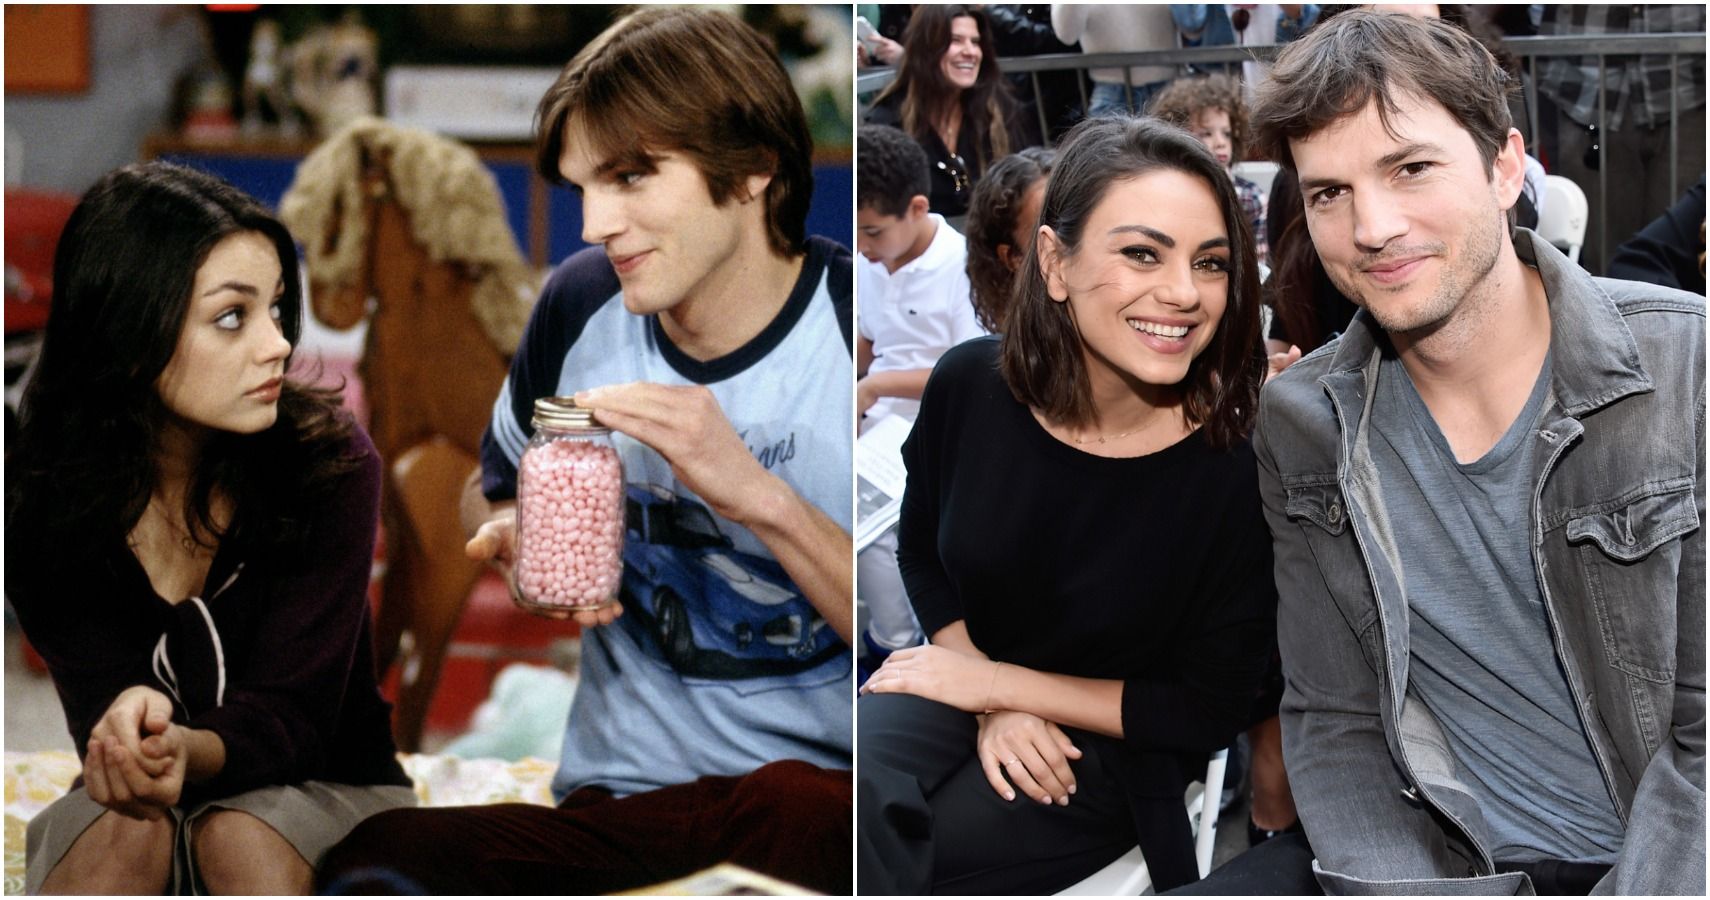 That ‘70s Show Cast: Where Are They Now?